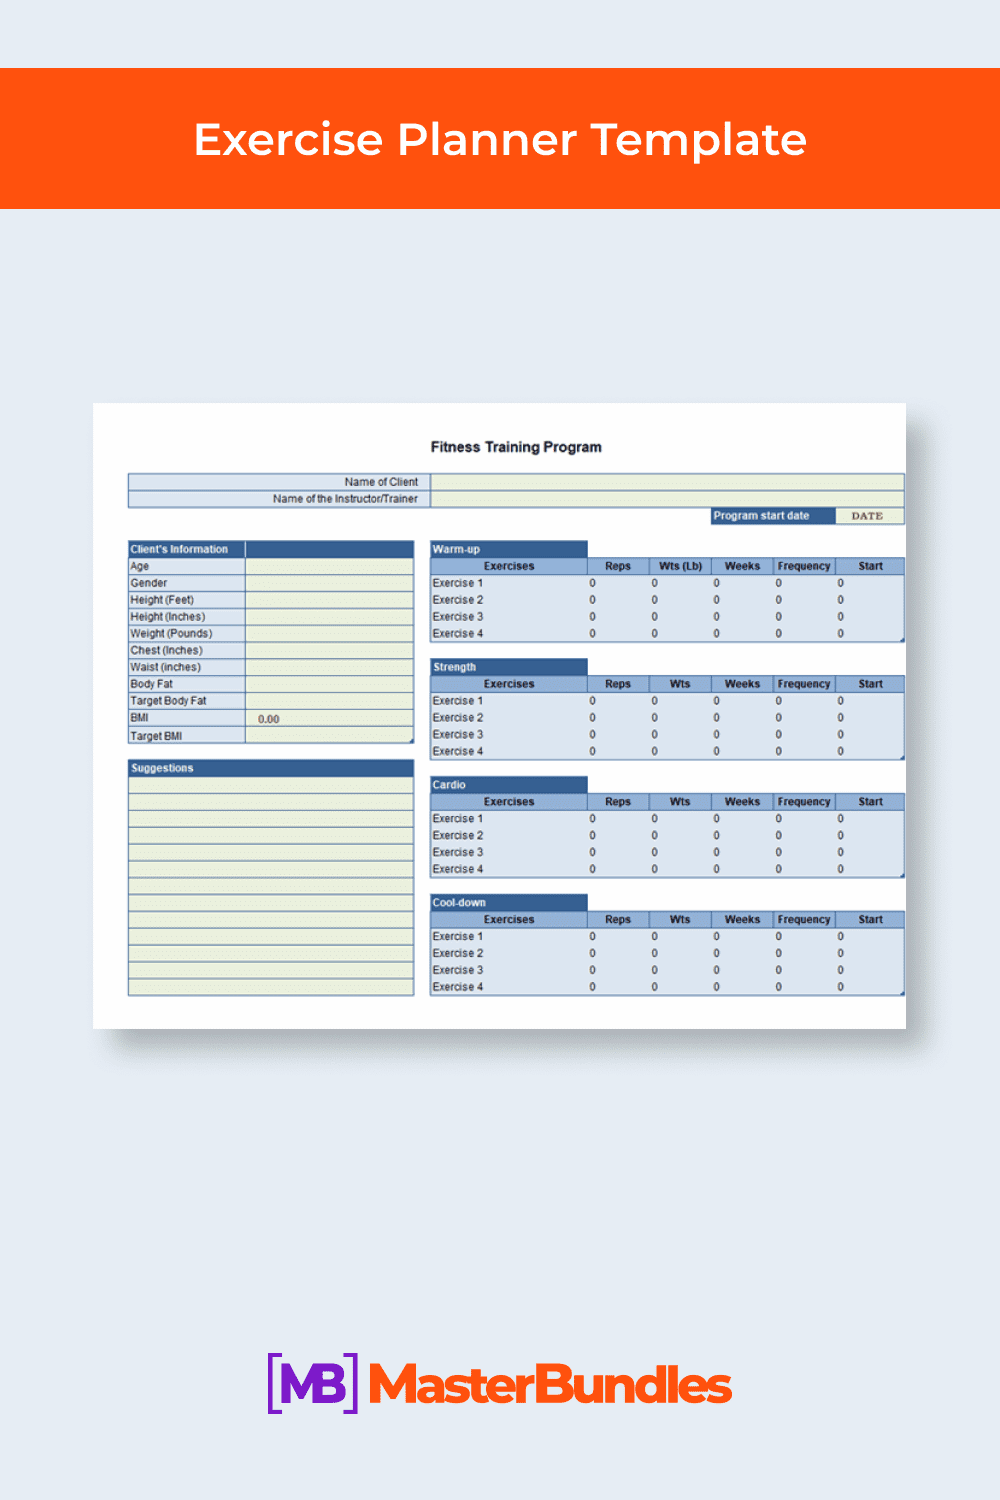 This is a detailed template for planner.